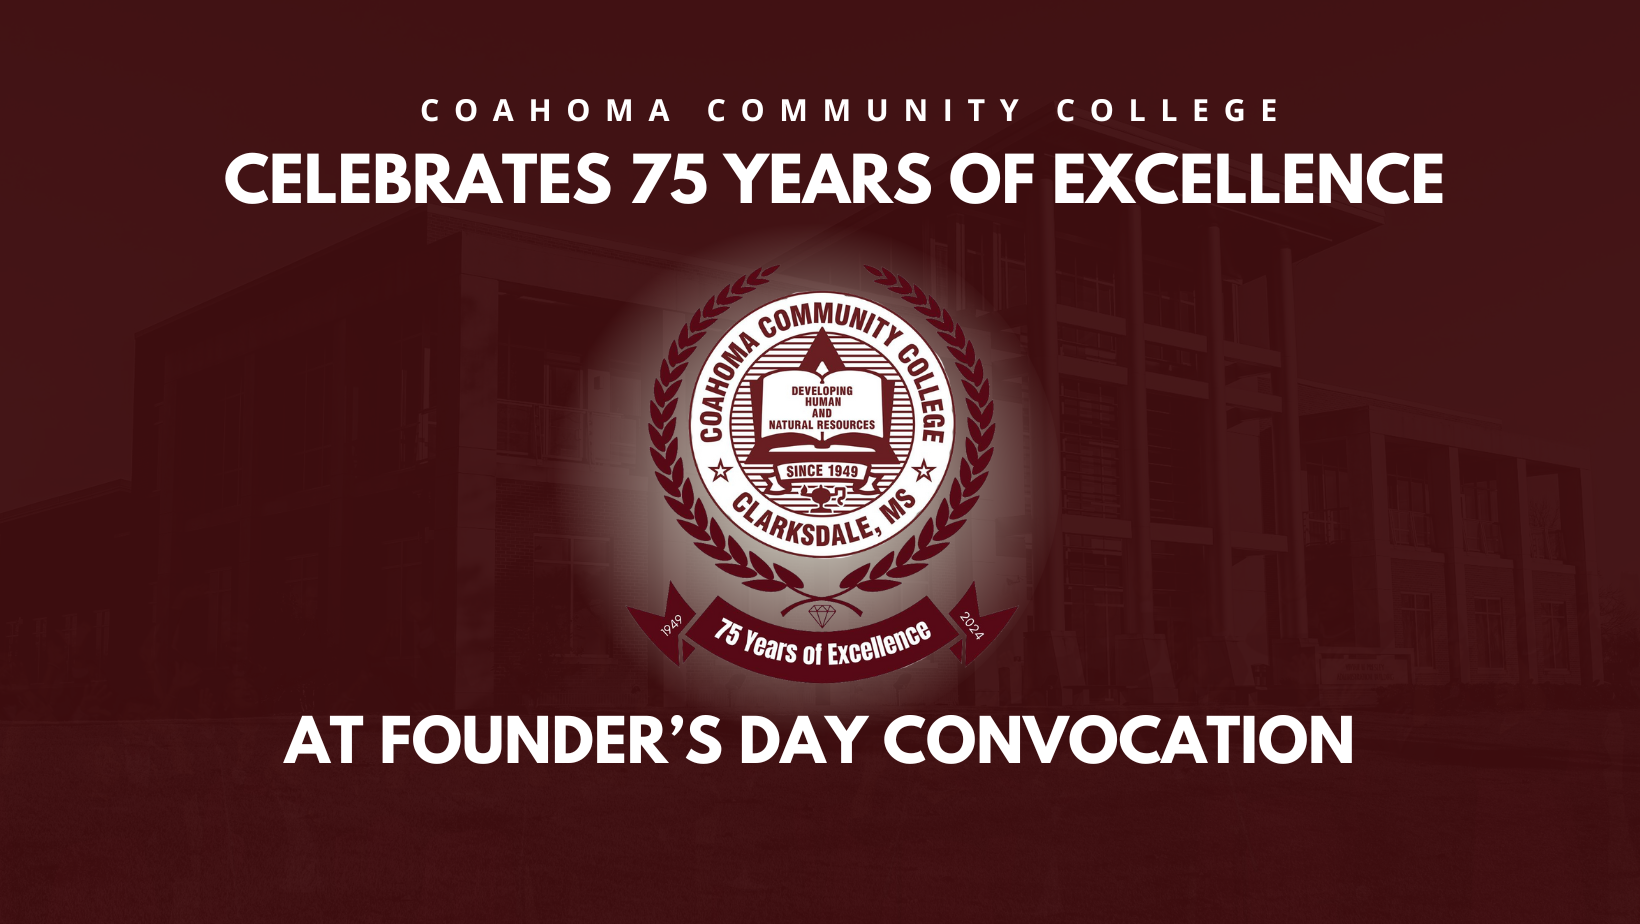 Founder Day Convocation